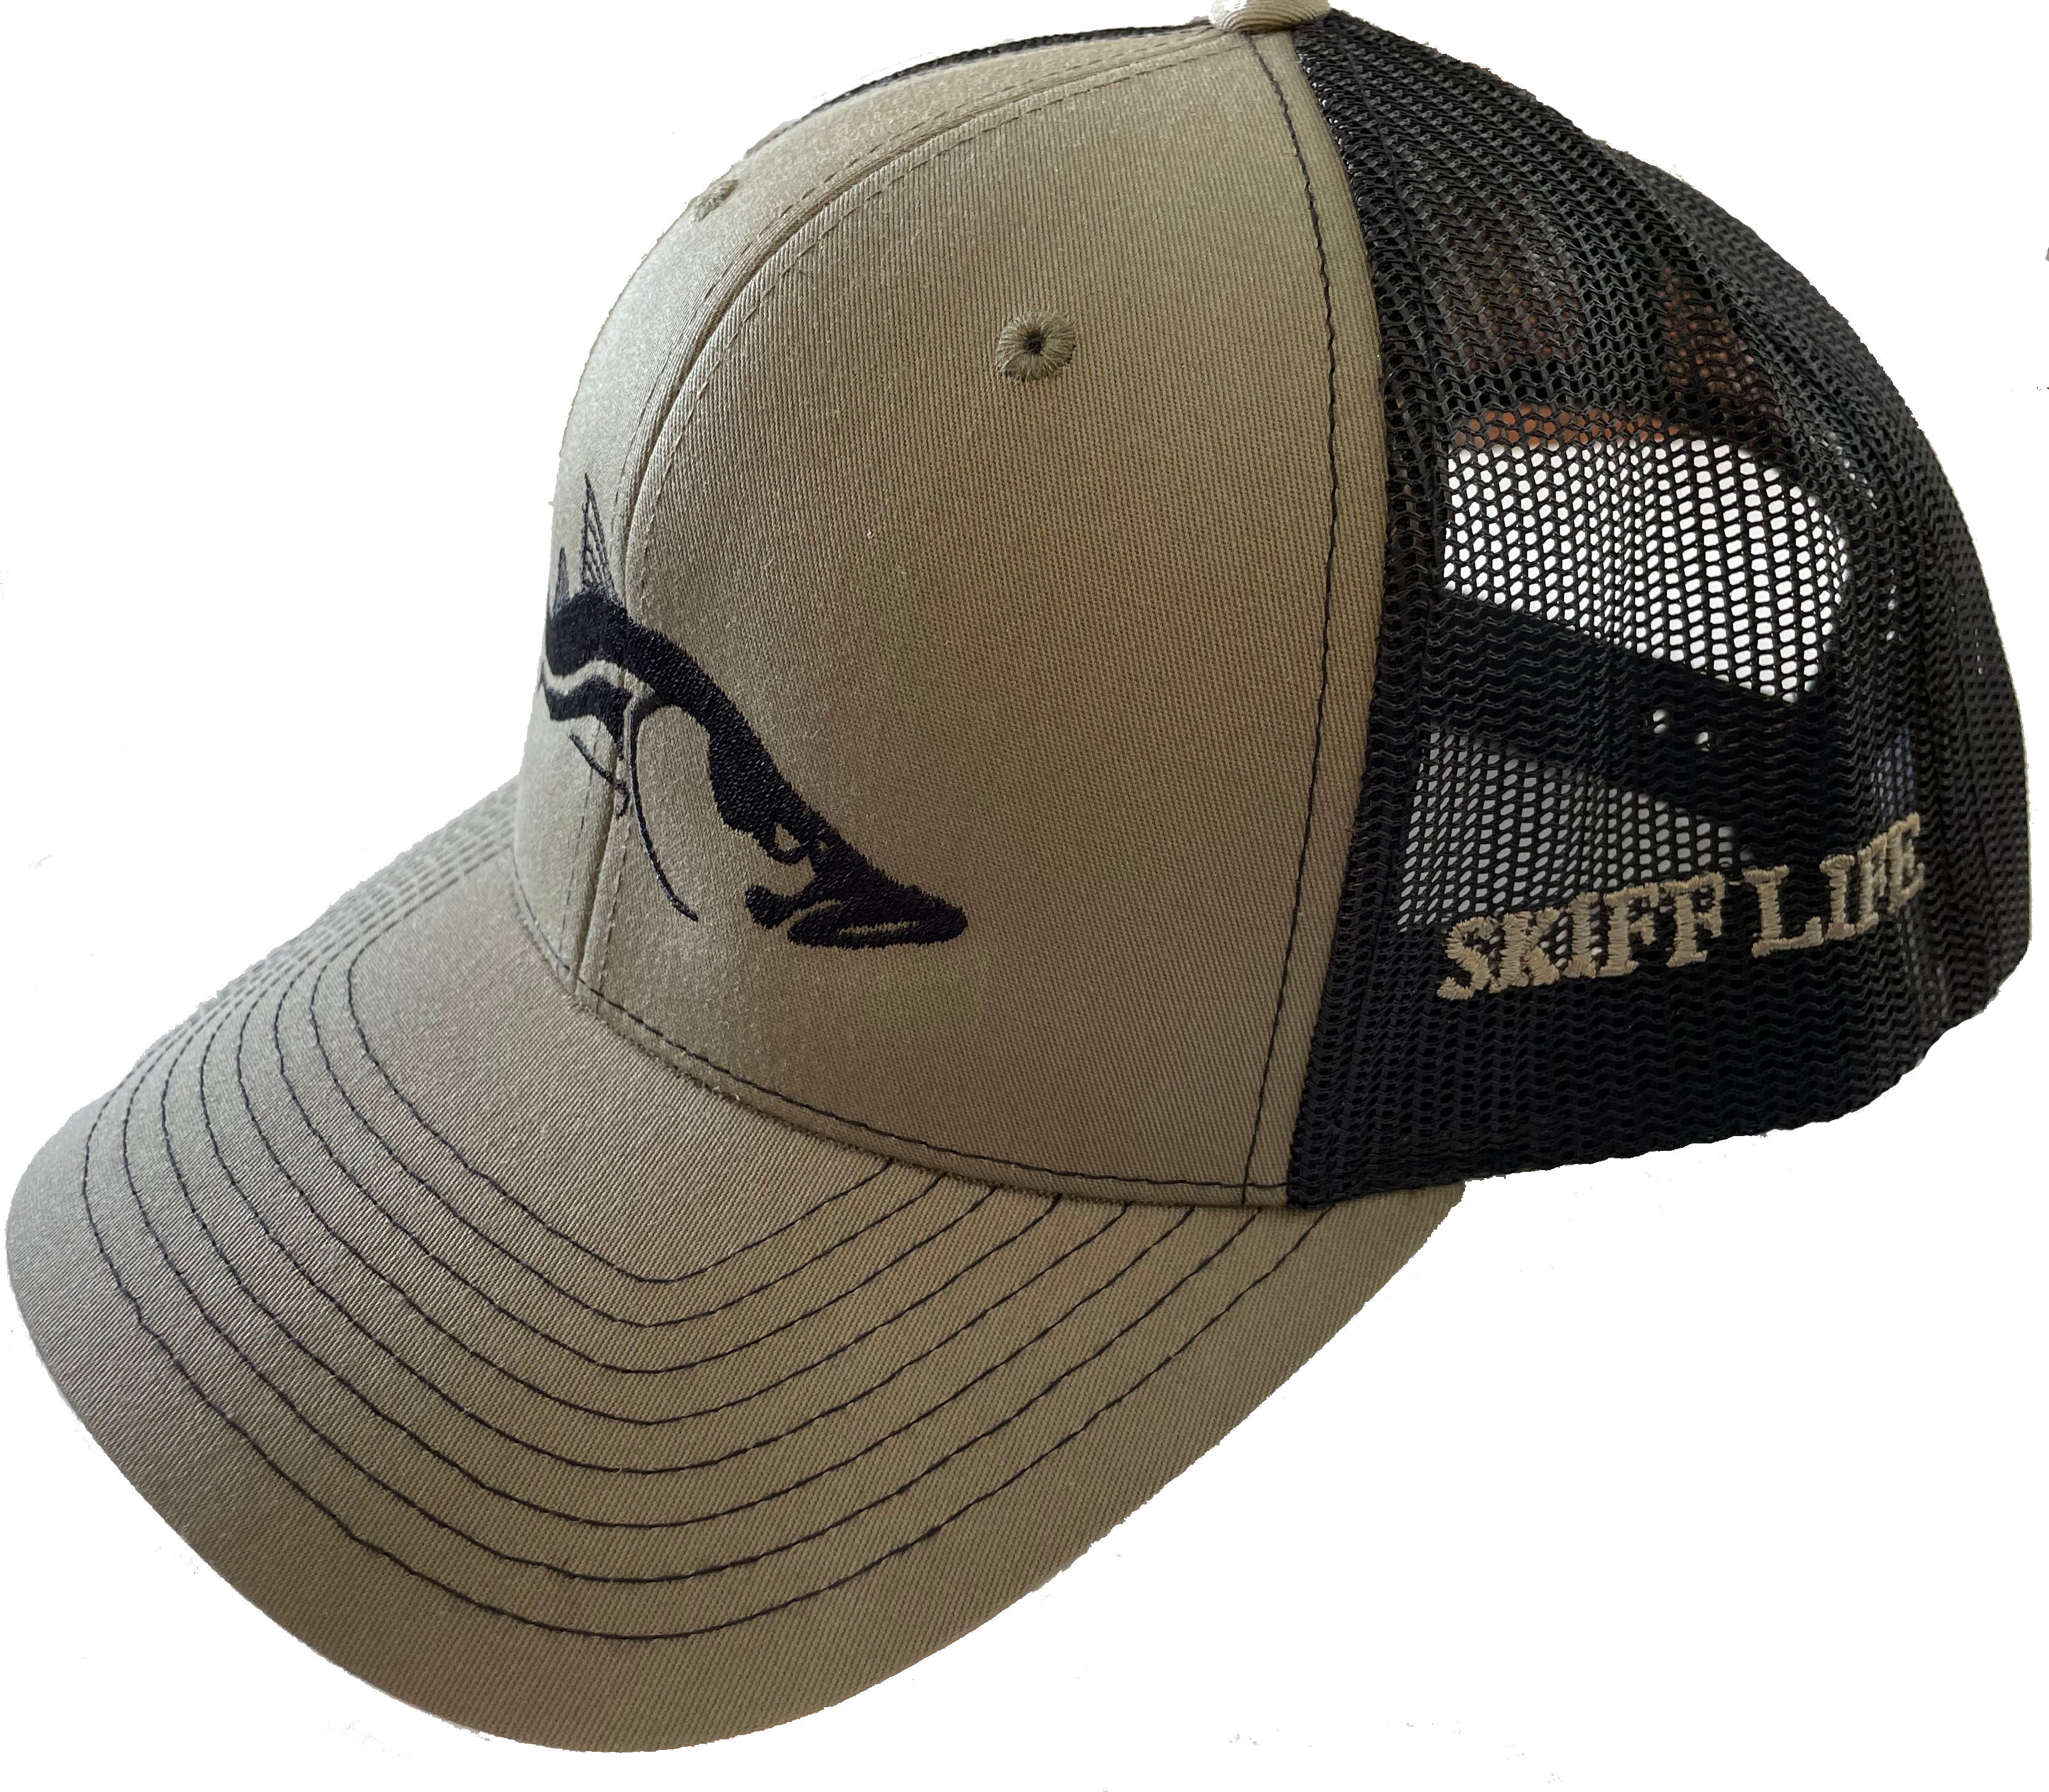 Snook Olive/Loden with Black Meshback RICHARDSON Trucker Hats by Skiff